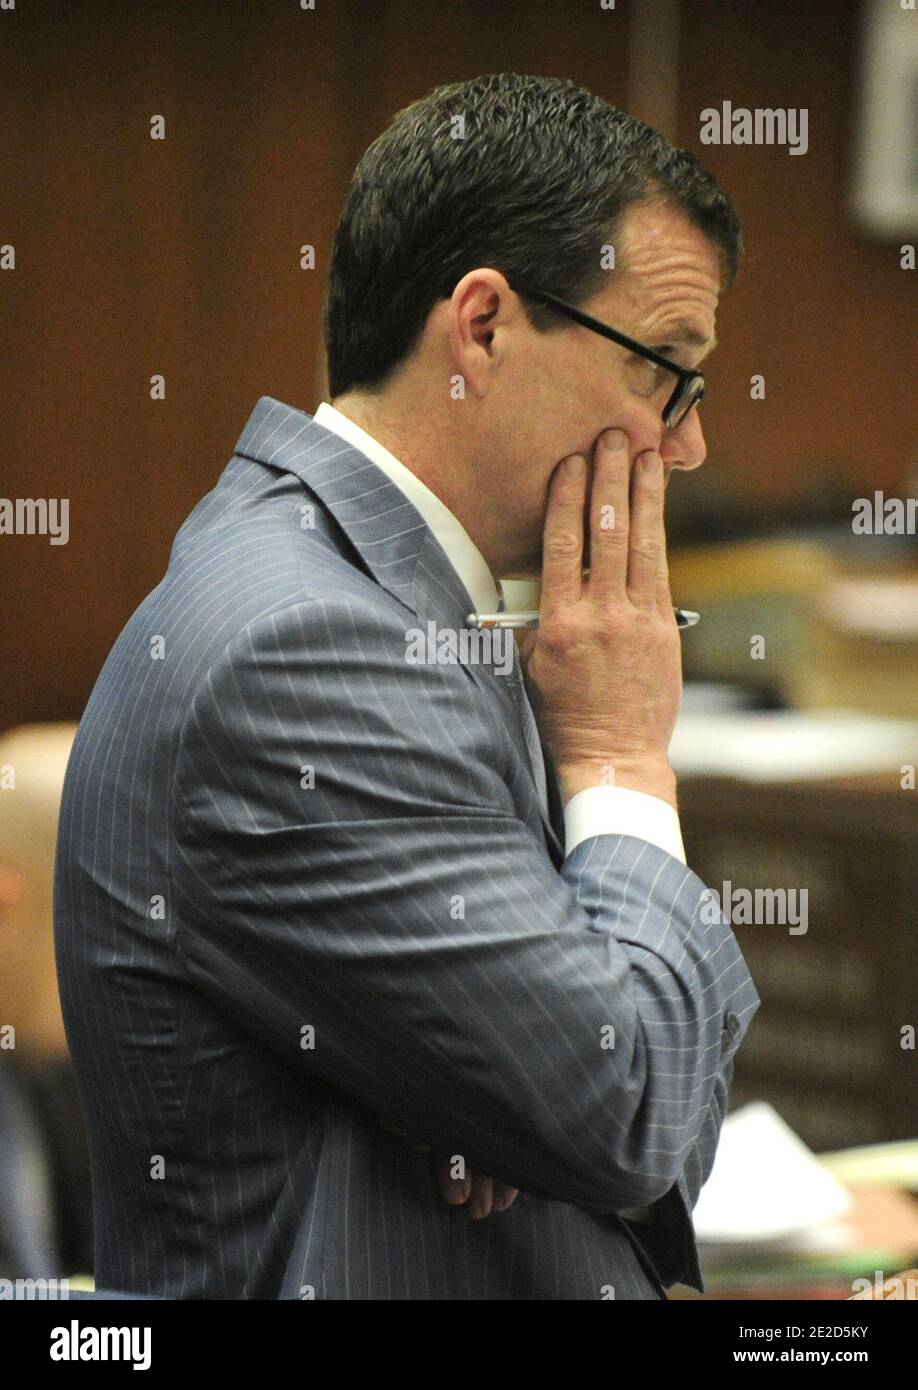 Defense attorney Ed Chernoff cross examines propofol expert Dr. Steven Shafer in Los Angeles Superior Court during the Dr. Conrad Murray involuntary manslaughter trial in Los Angeles, California, USA on 24 October 2011. Murray has pleaded not guilty and faces four years in prison and the loss of his medical licenses if convicted of involuntary manslaughter in Michael Jackson's death. Photo by Paul Buck/Pool/ABACAPRESS.COM Stock Photo